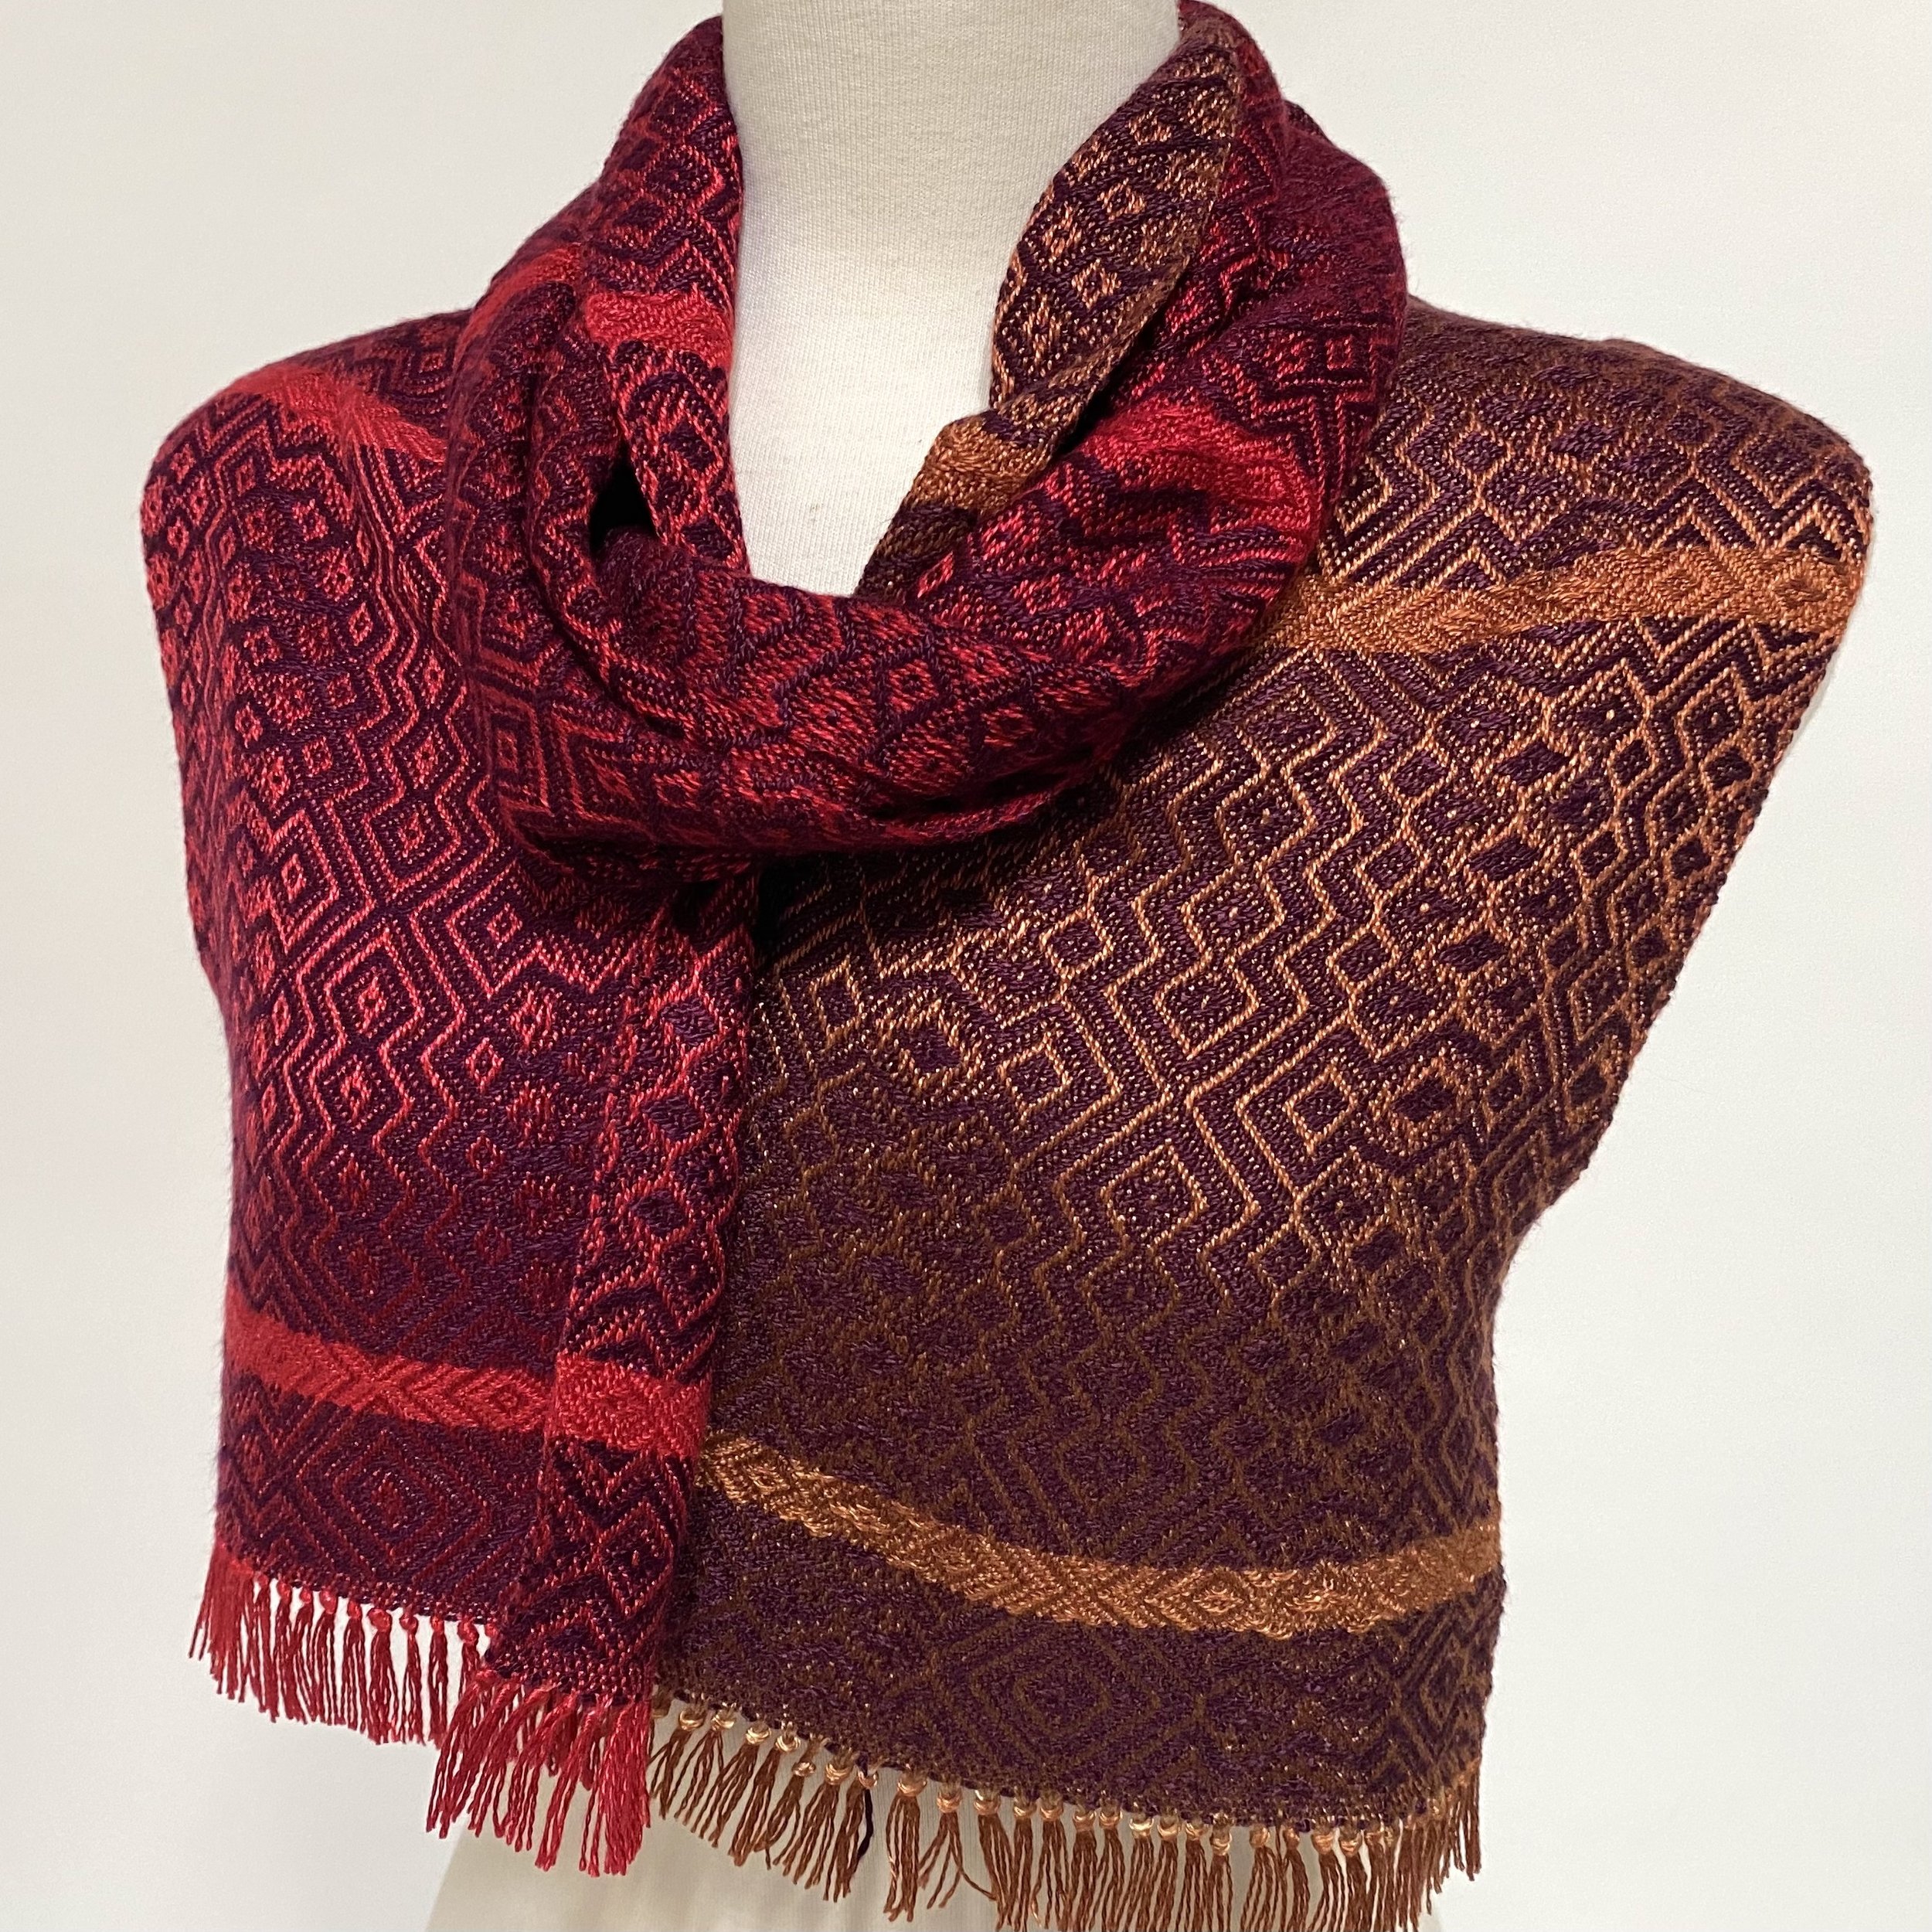   Autumn Inspiration Handwoven Scarf 12       For more details by clicking on this link.   